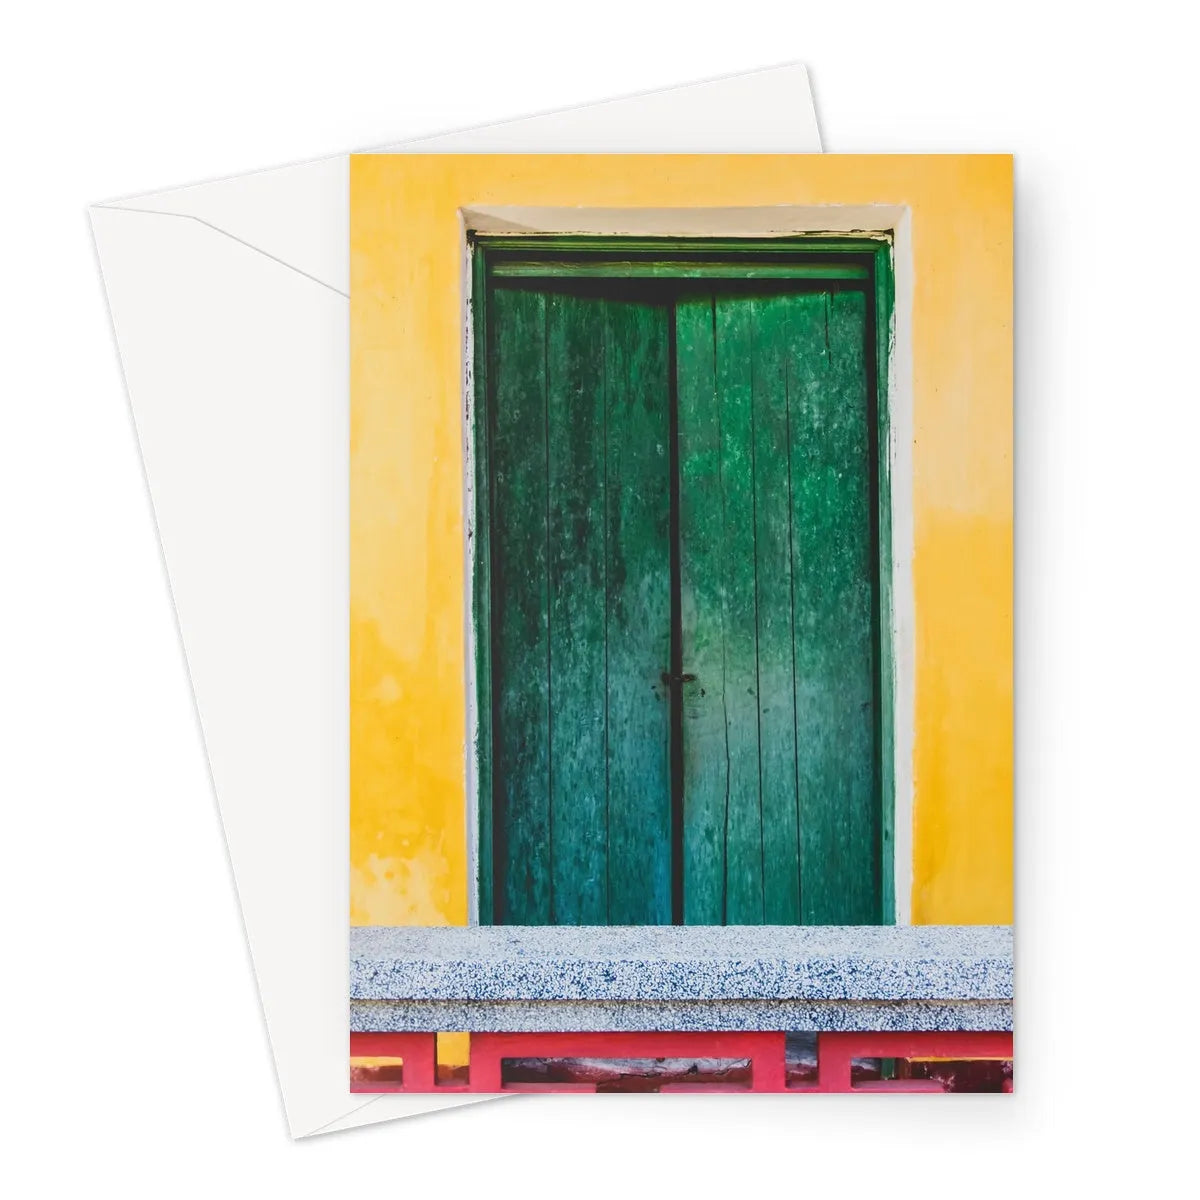 Chilli Lime Coriander Greeting Card - A5 Portrait / 1 Card - Notebooks & Notepads - Aesthetic Art